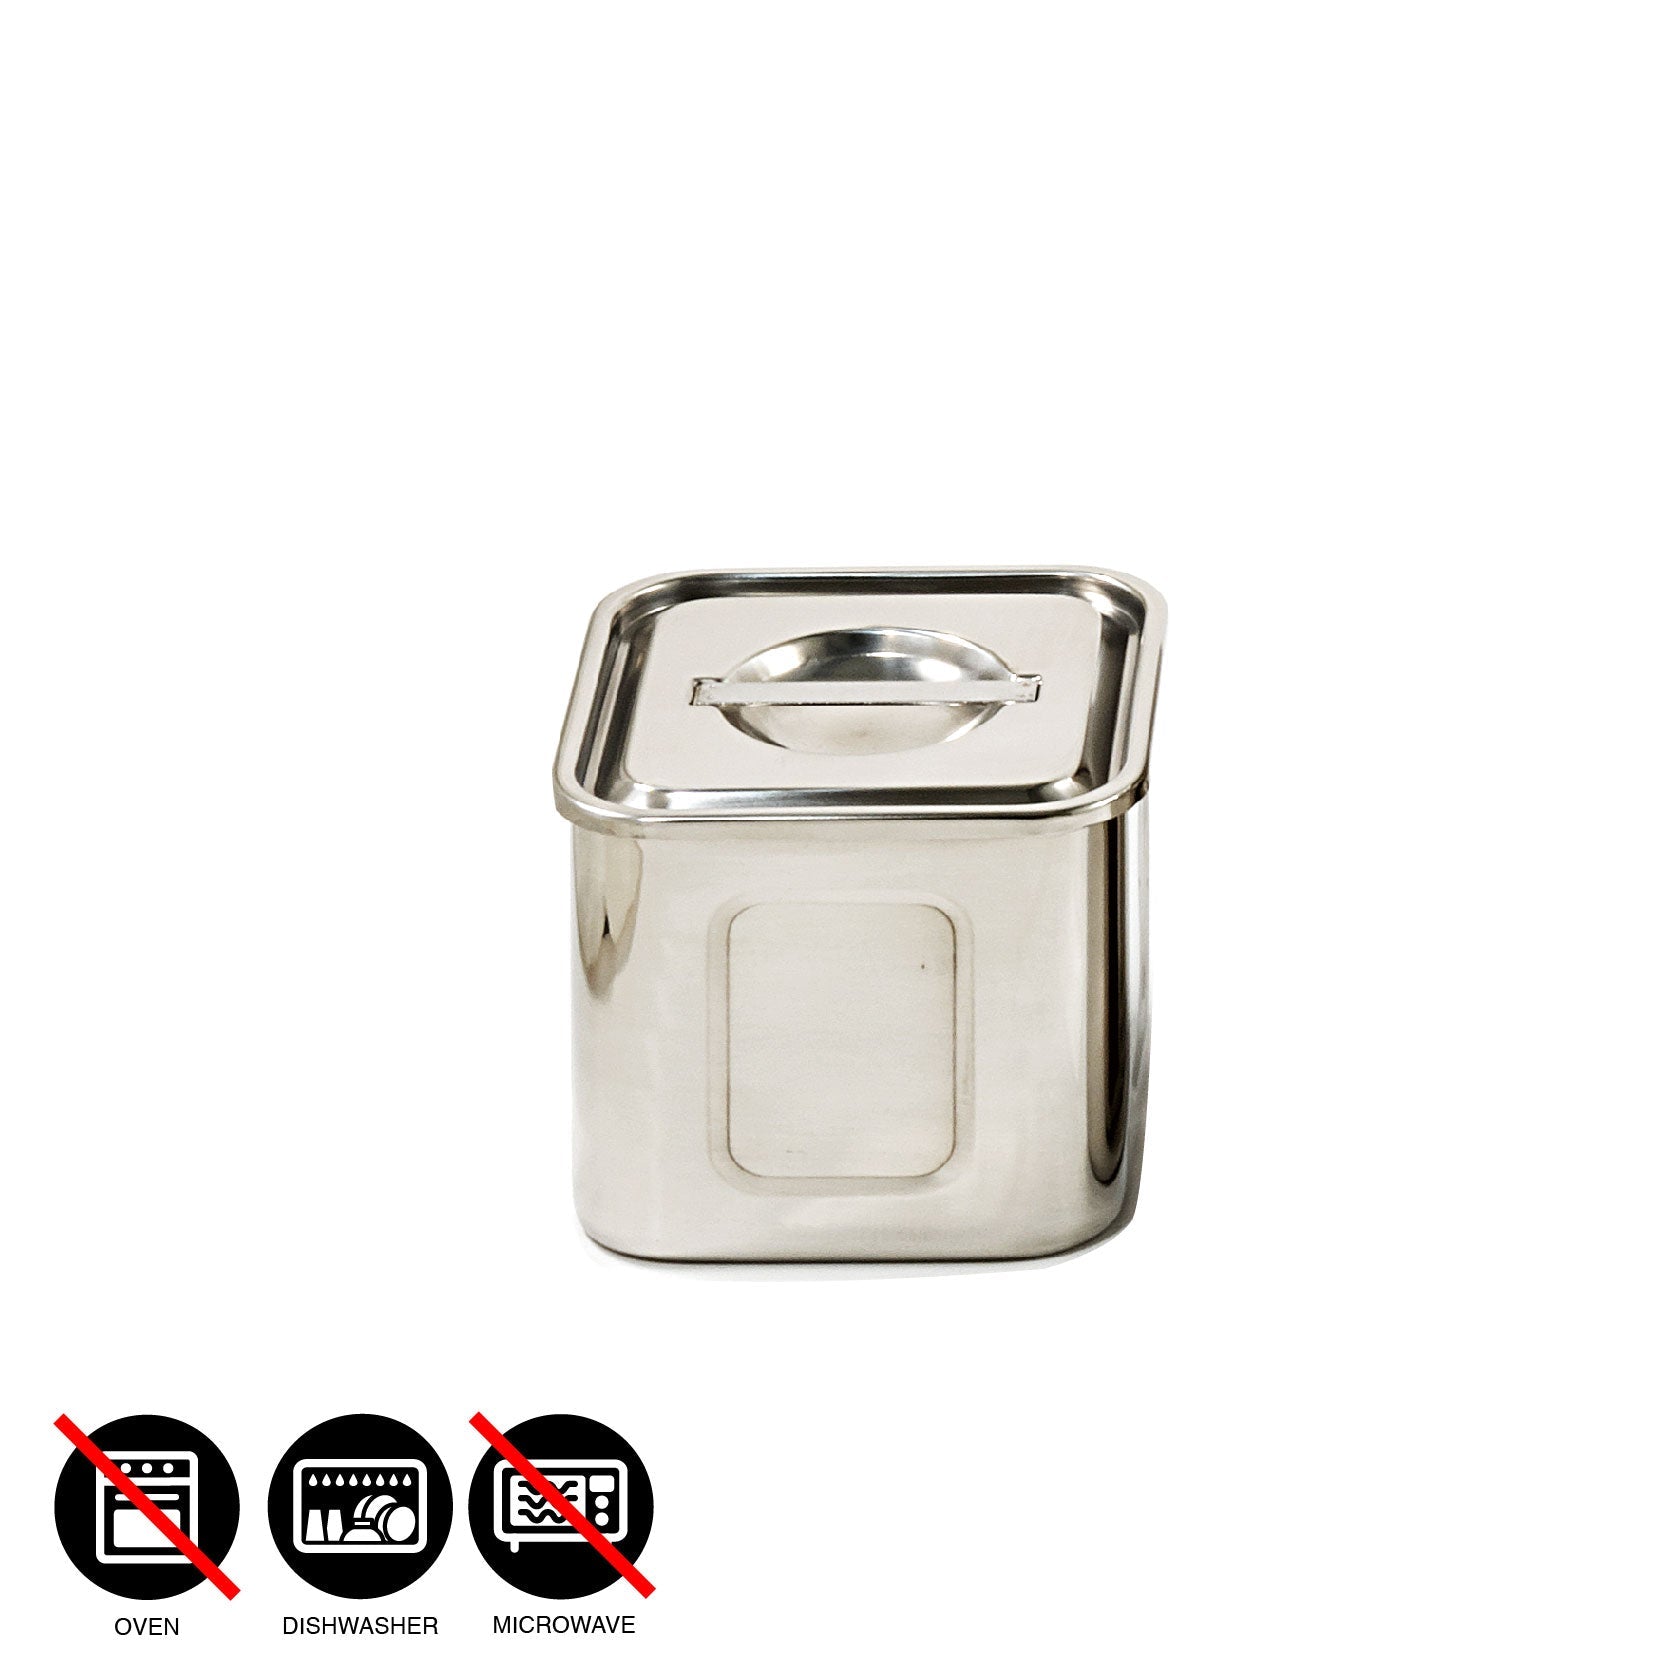 UK Stainless kitchen container / 10.5cm - 15cm